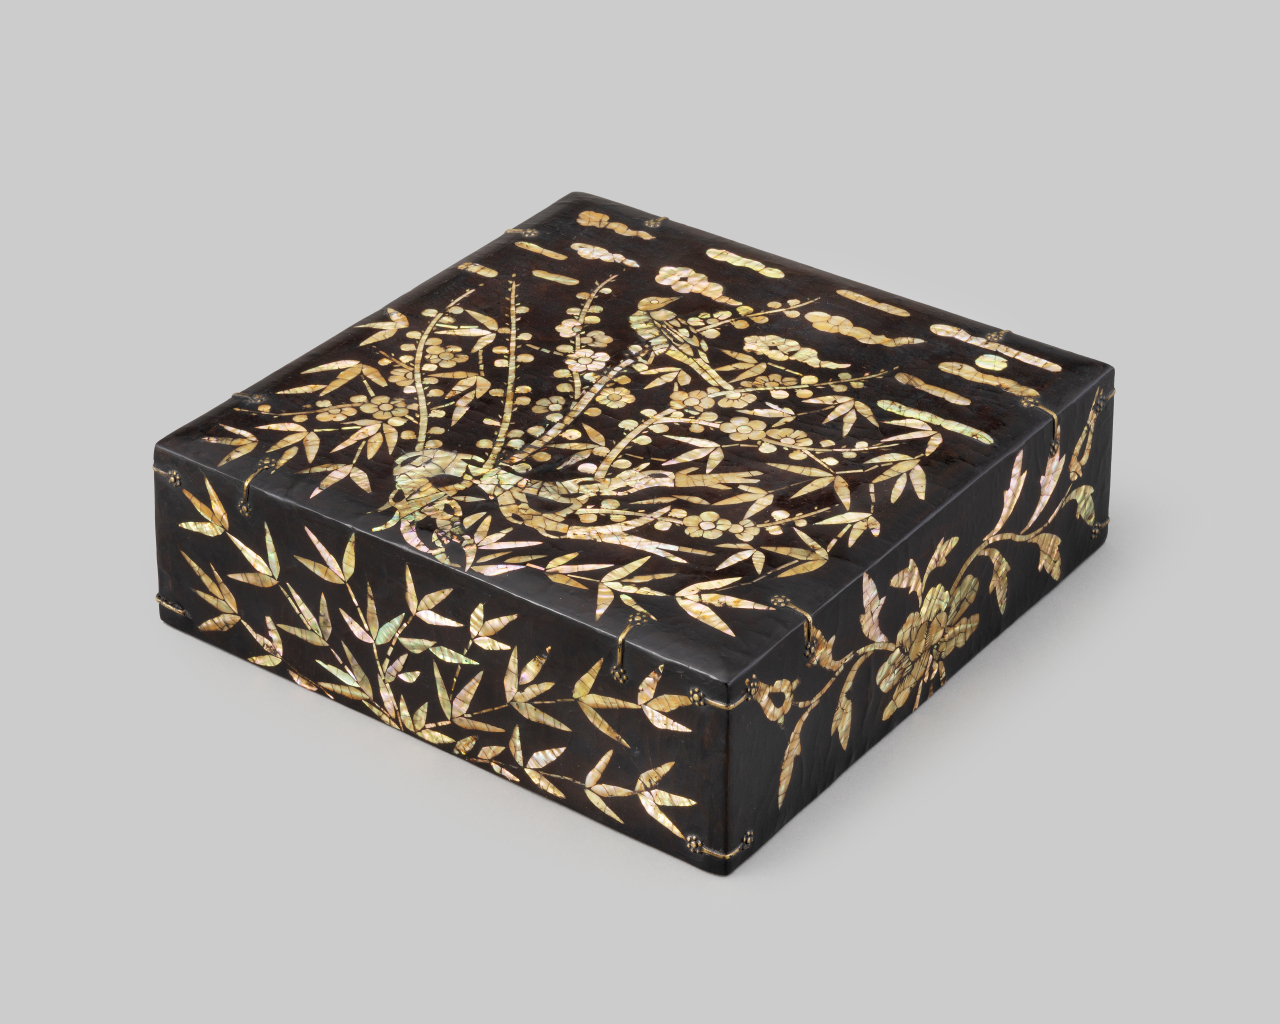 Mother-of-pearl inlay box with plum, bird, and bamboo design repatriated from Japan in 2012 (CHA)